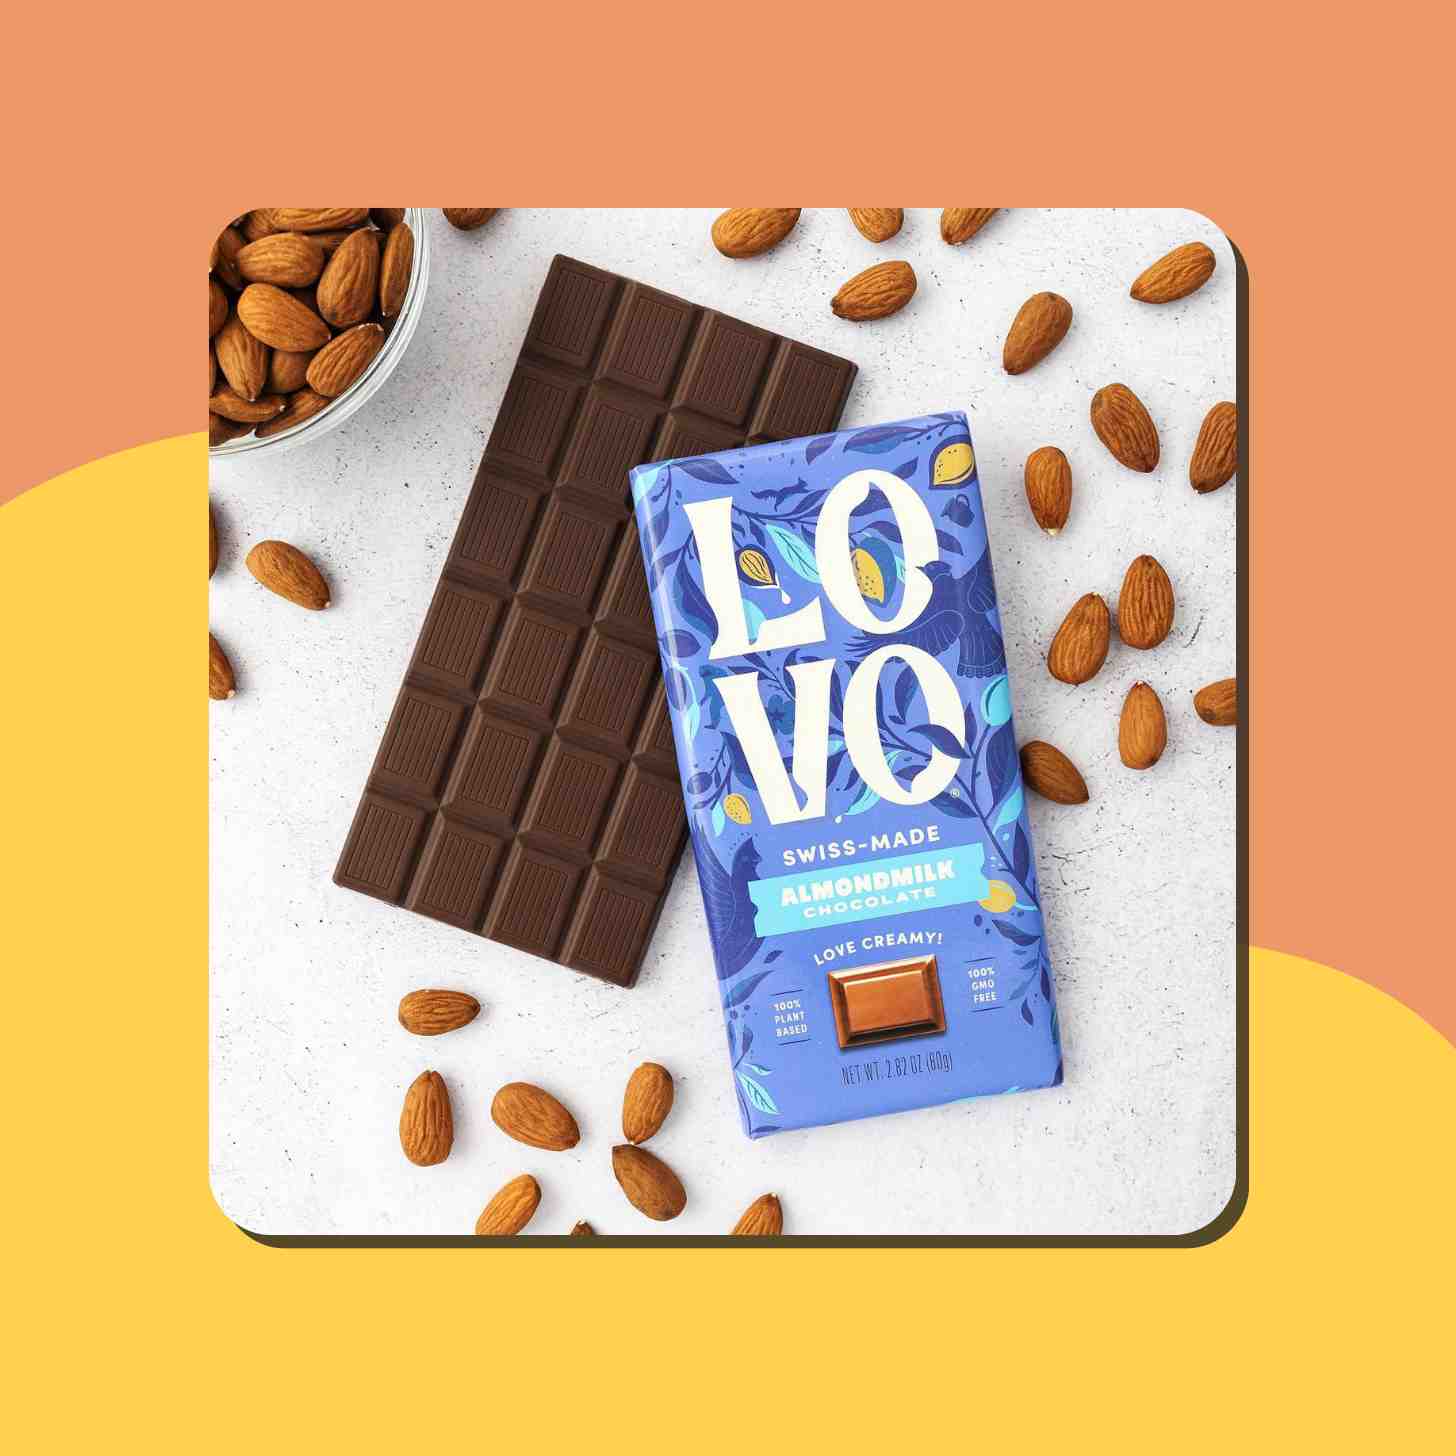 A Lovo Chocolate Bar And Its Envelope Sorrounded By Almonds